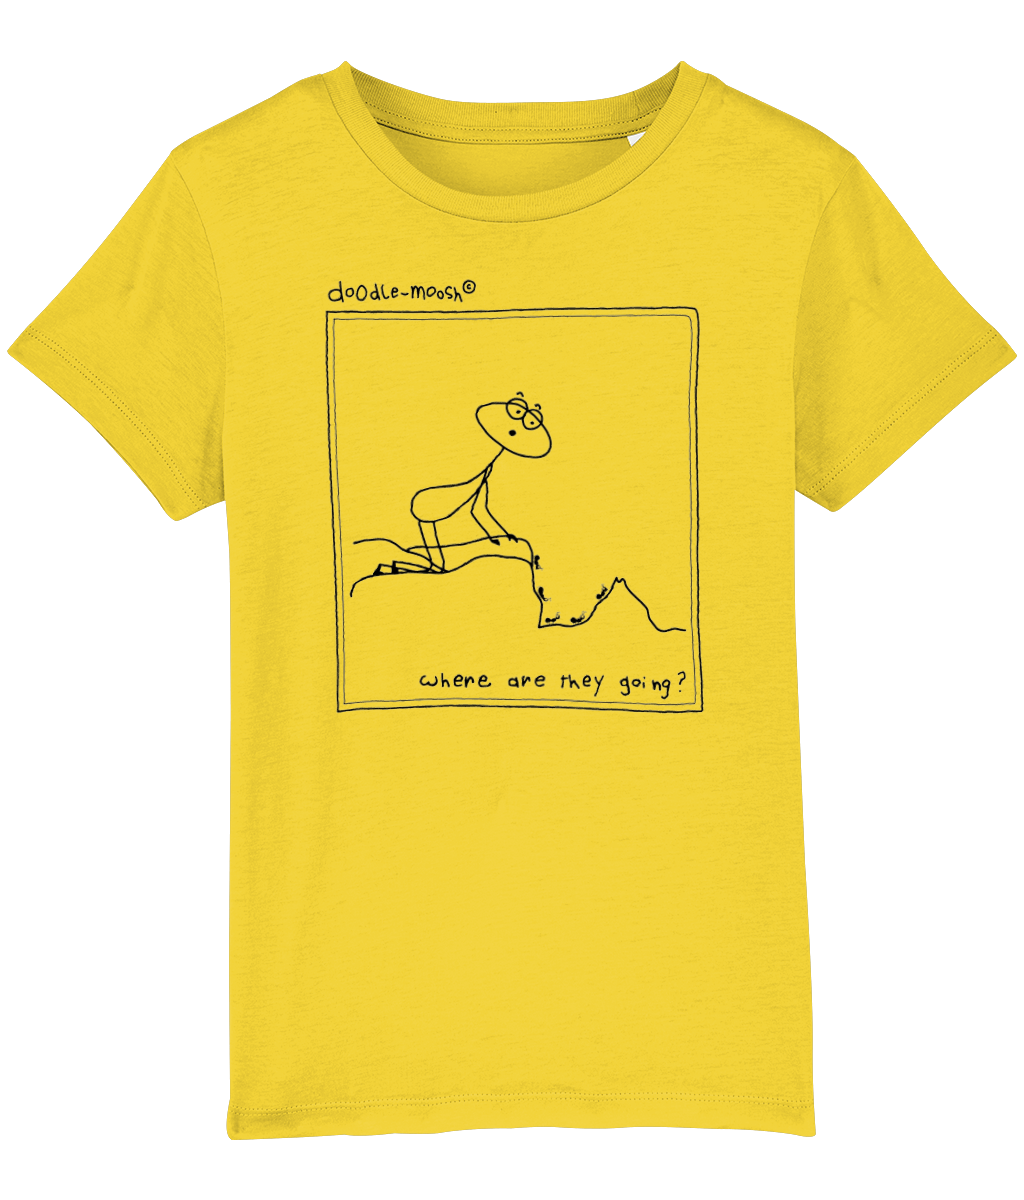 Where are they going t-shirt, yellow with black